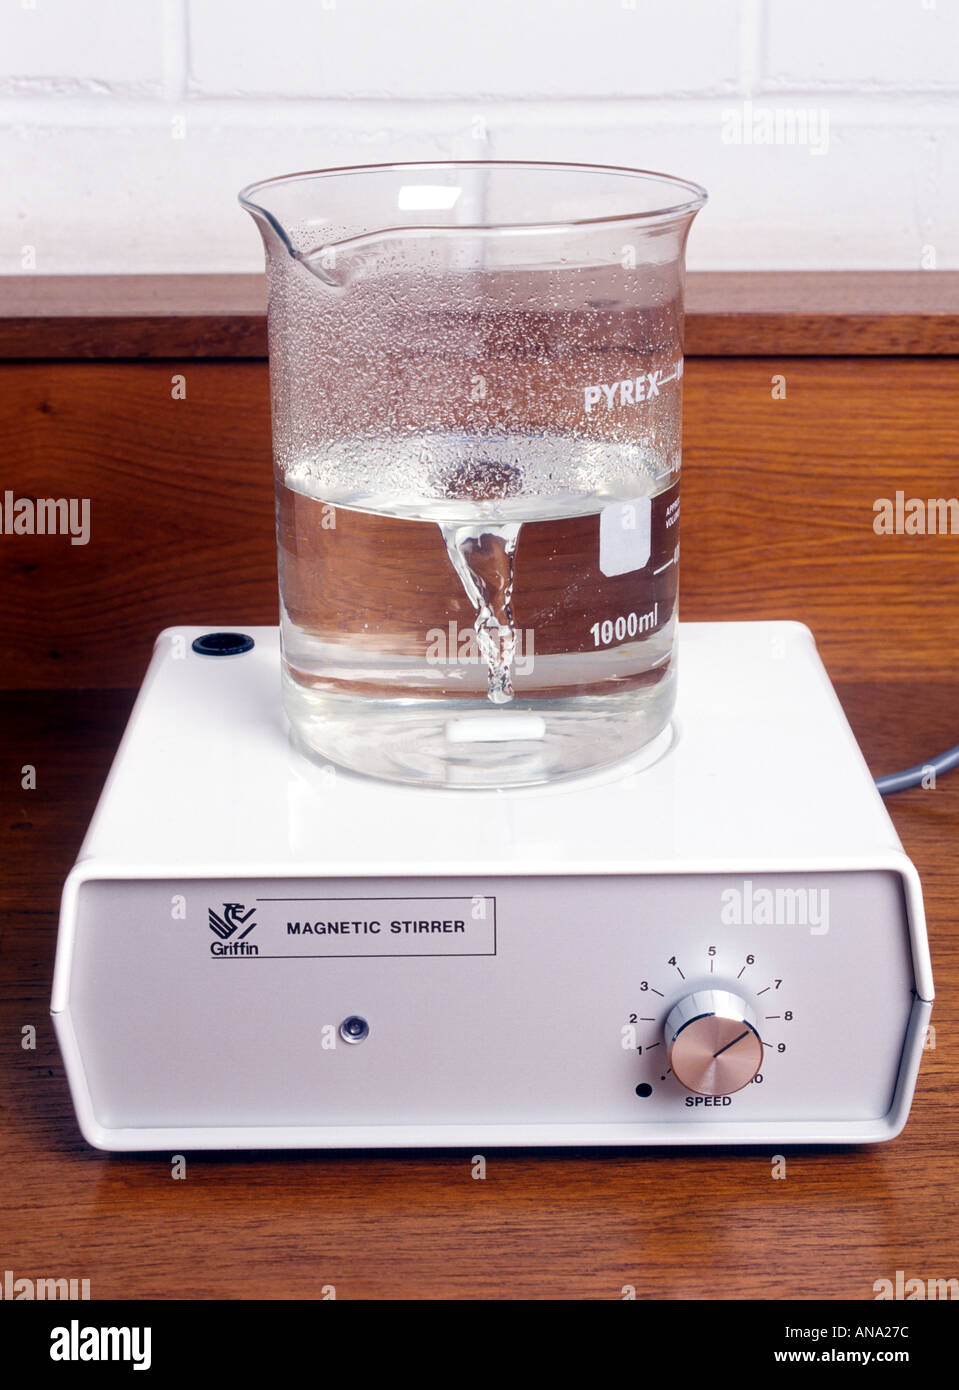 Magnetic Stirrer High Resolution Stock Photography and Images - Alamy